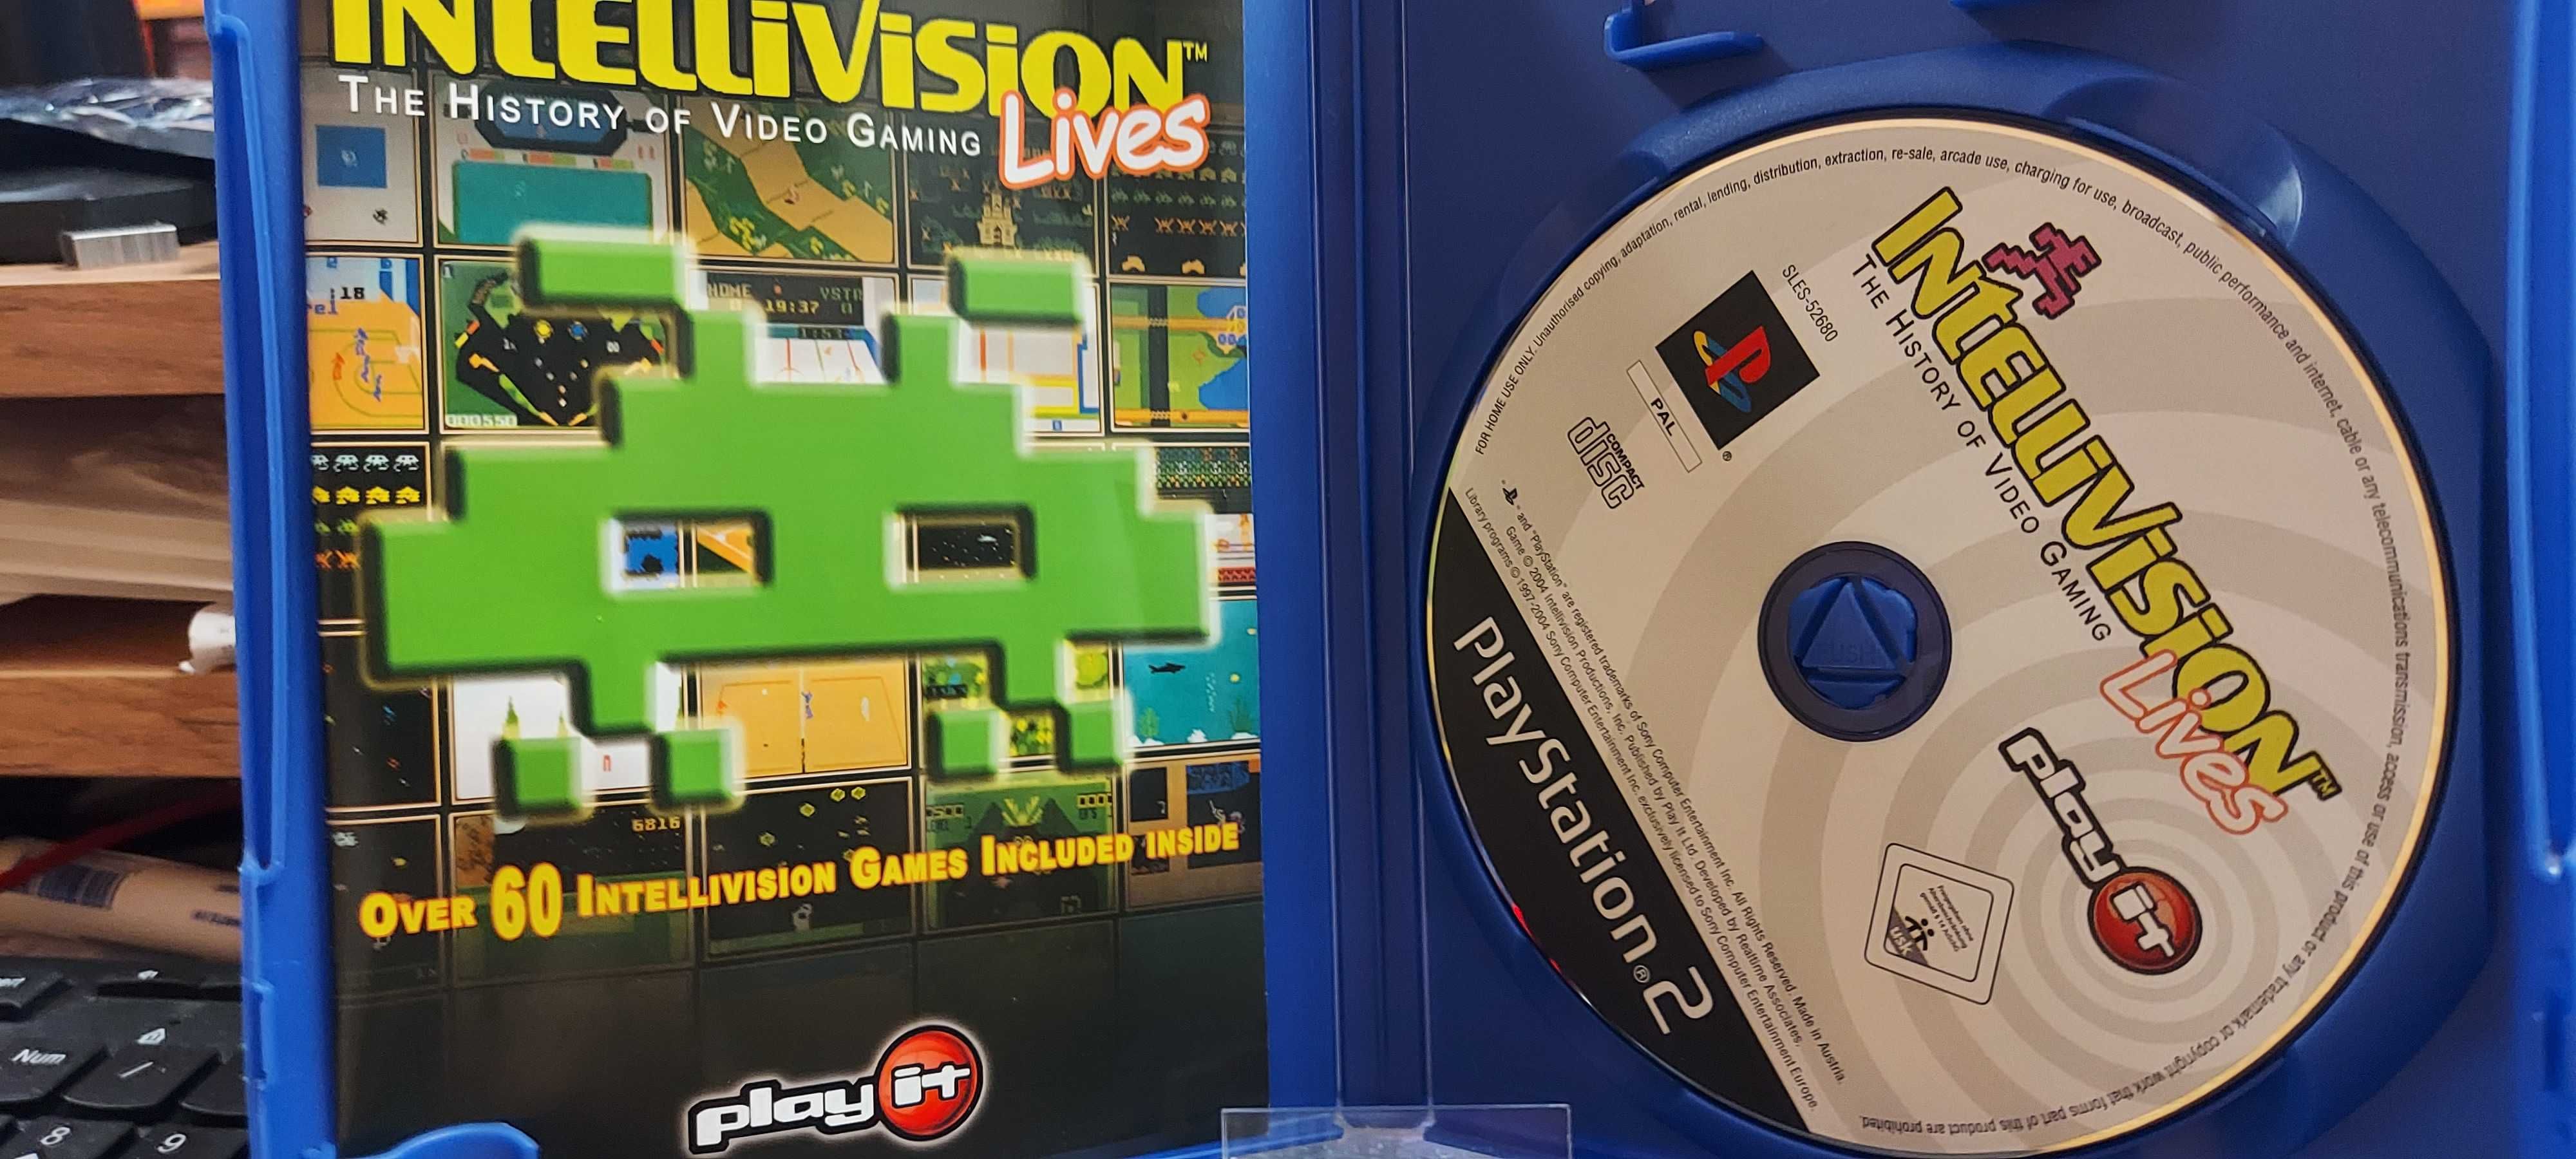 Intelliviosion lives: The history of video games PS2